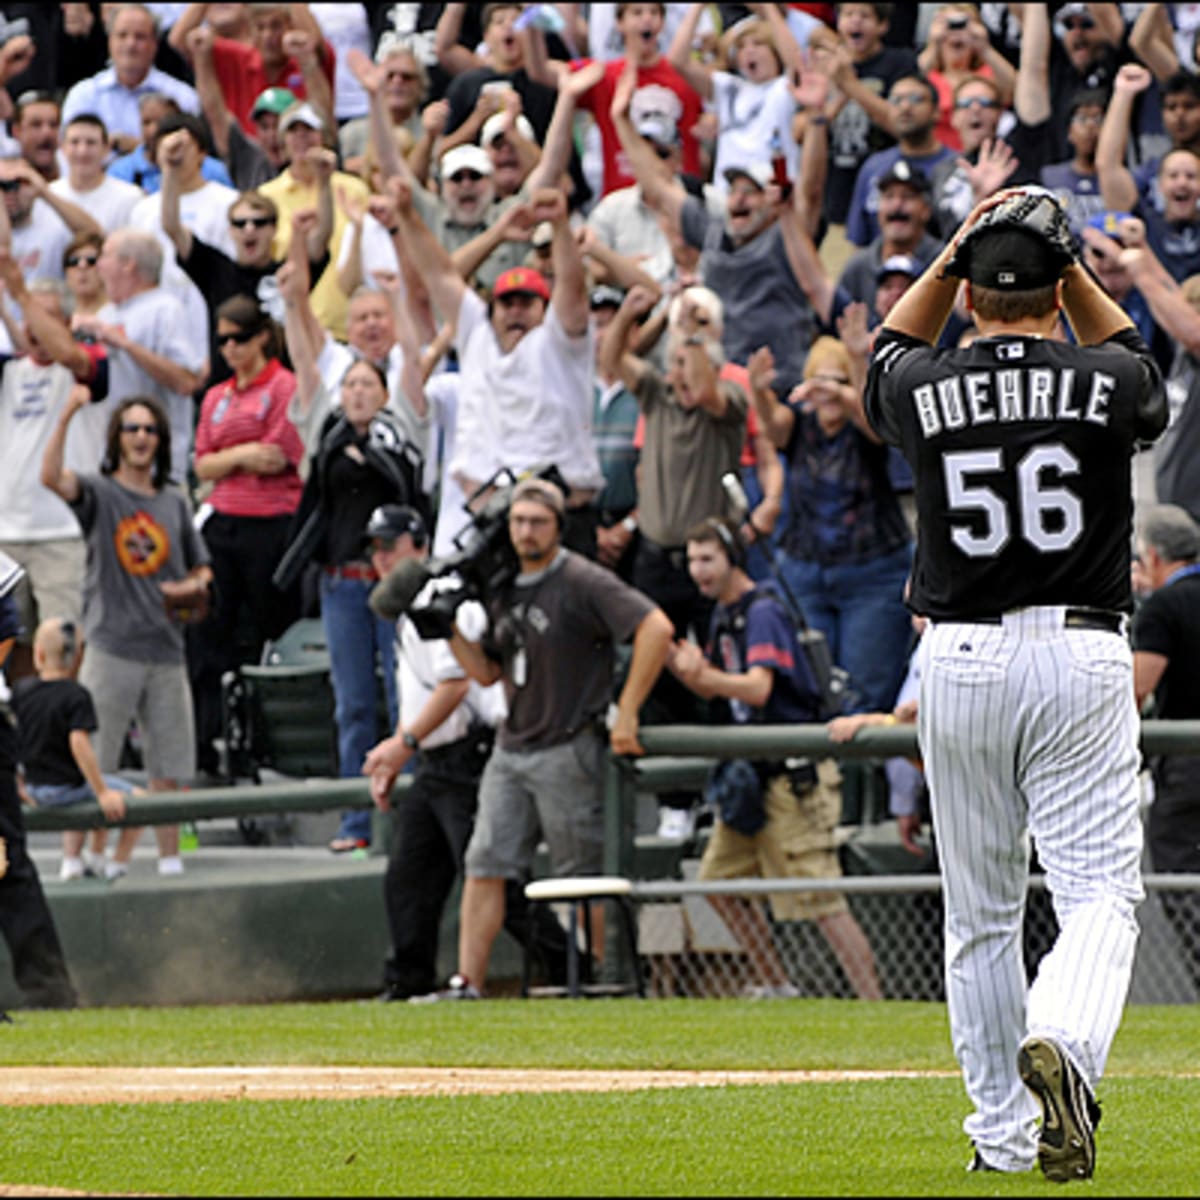 OTD 2009: Mark Buehrle Perfect Game Saved in 9th - Pro Sports Outlook